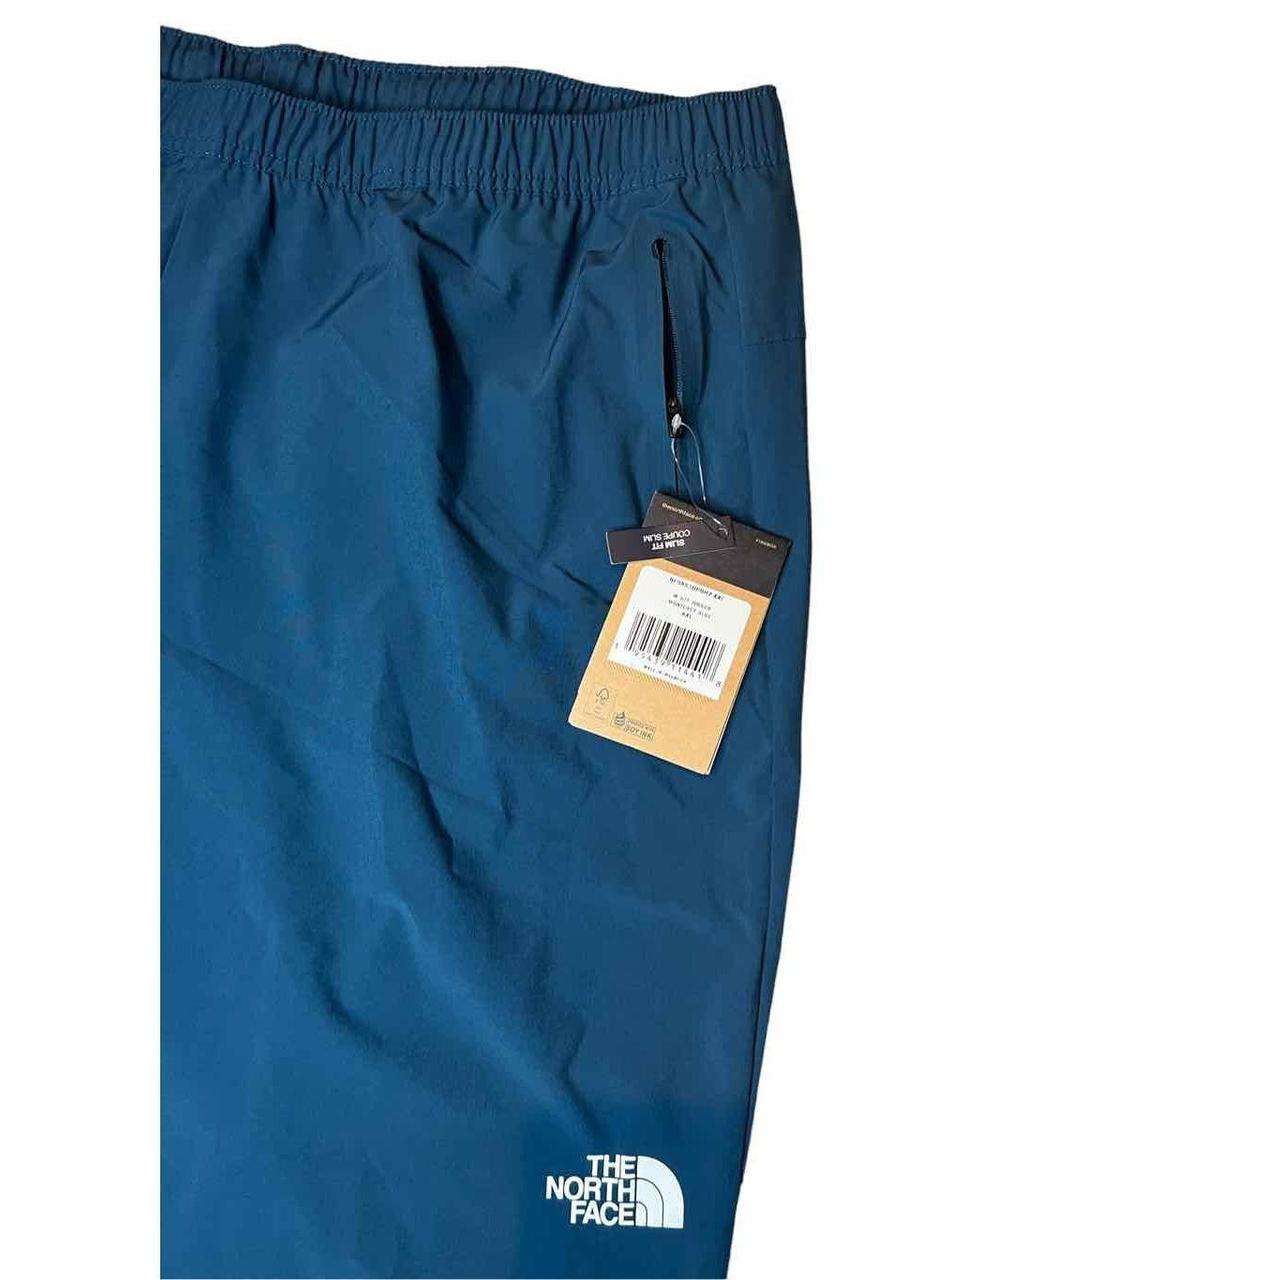 The North Face Men's Blue Trousers (2)